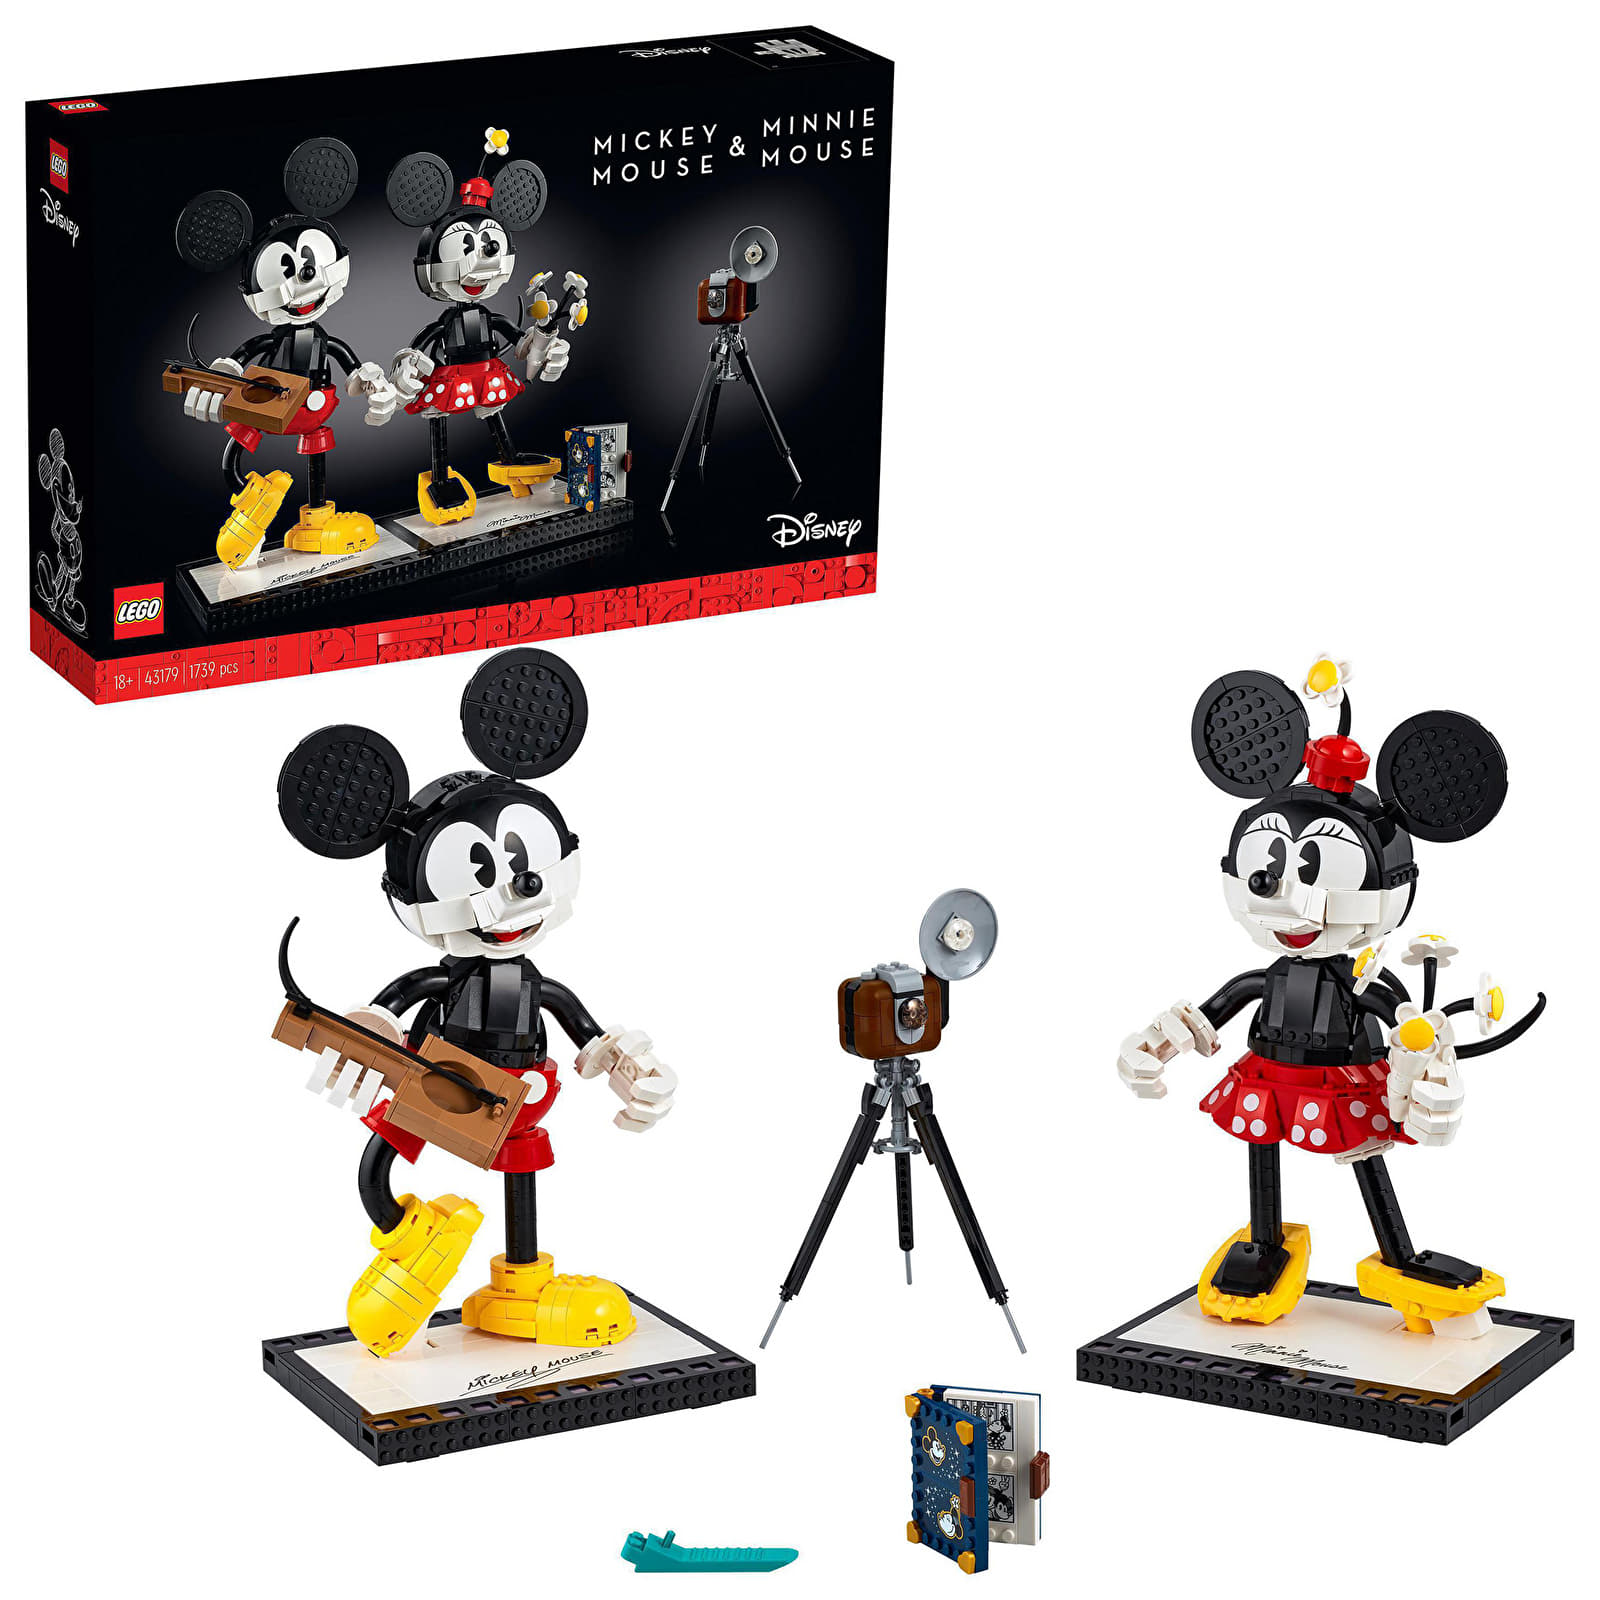 Kits LEGO® LEGO® Disney Princess™ 43179 Mickey Mouse & Minnie Mouse Buildable Characters